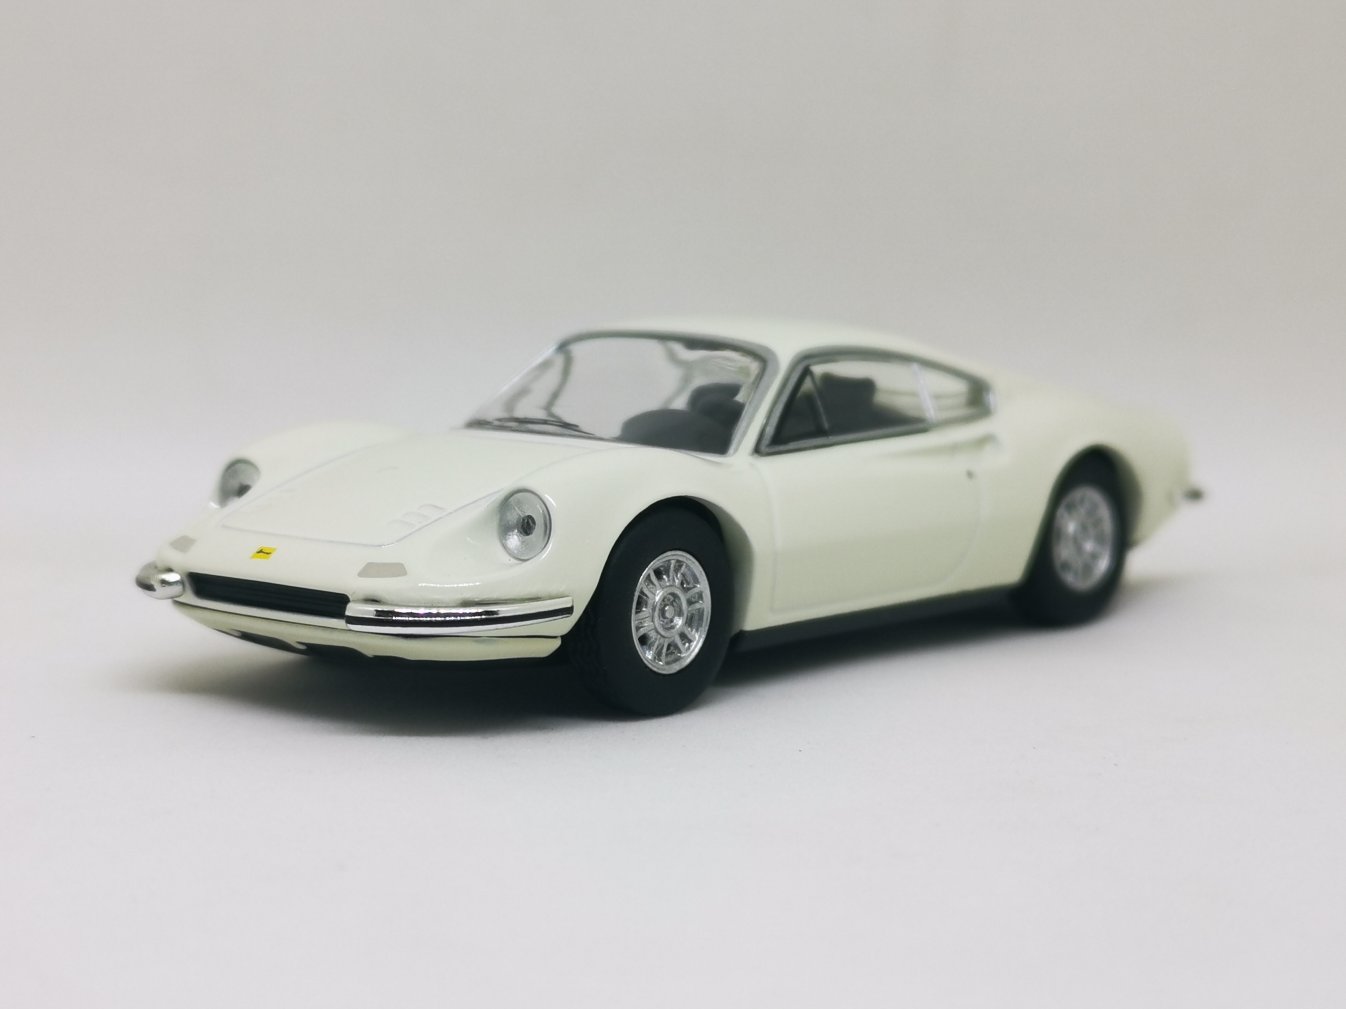 Tomytec Limited Vintage Neo Ferrari 246 GT Dino 1:64 SCALE White NEW IN BOX